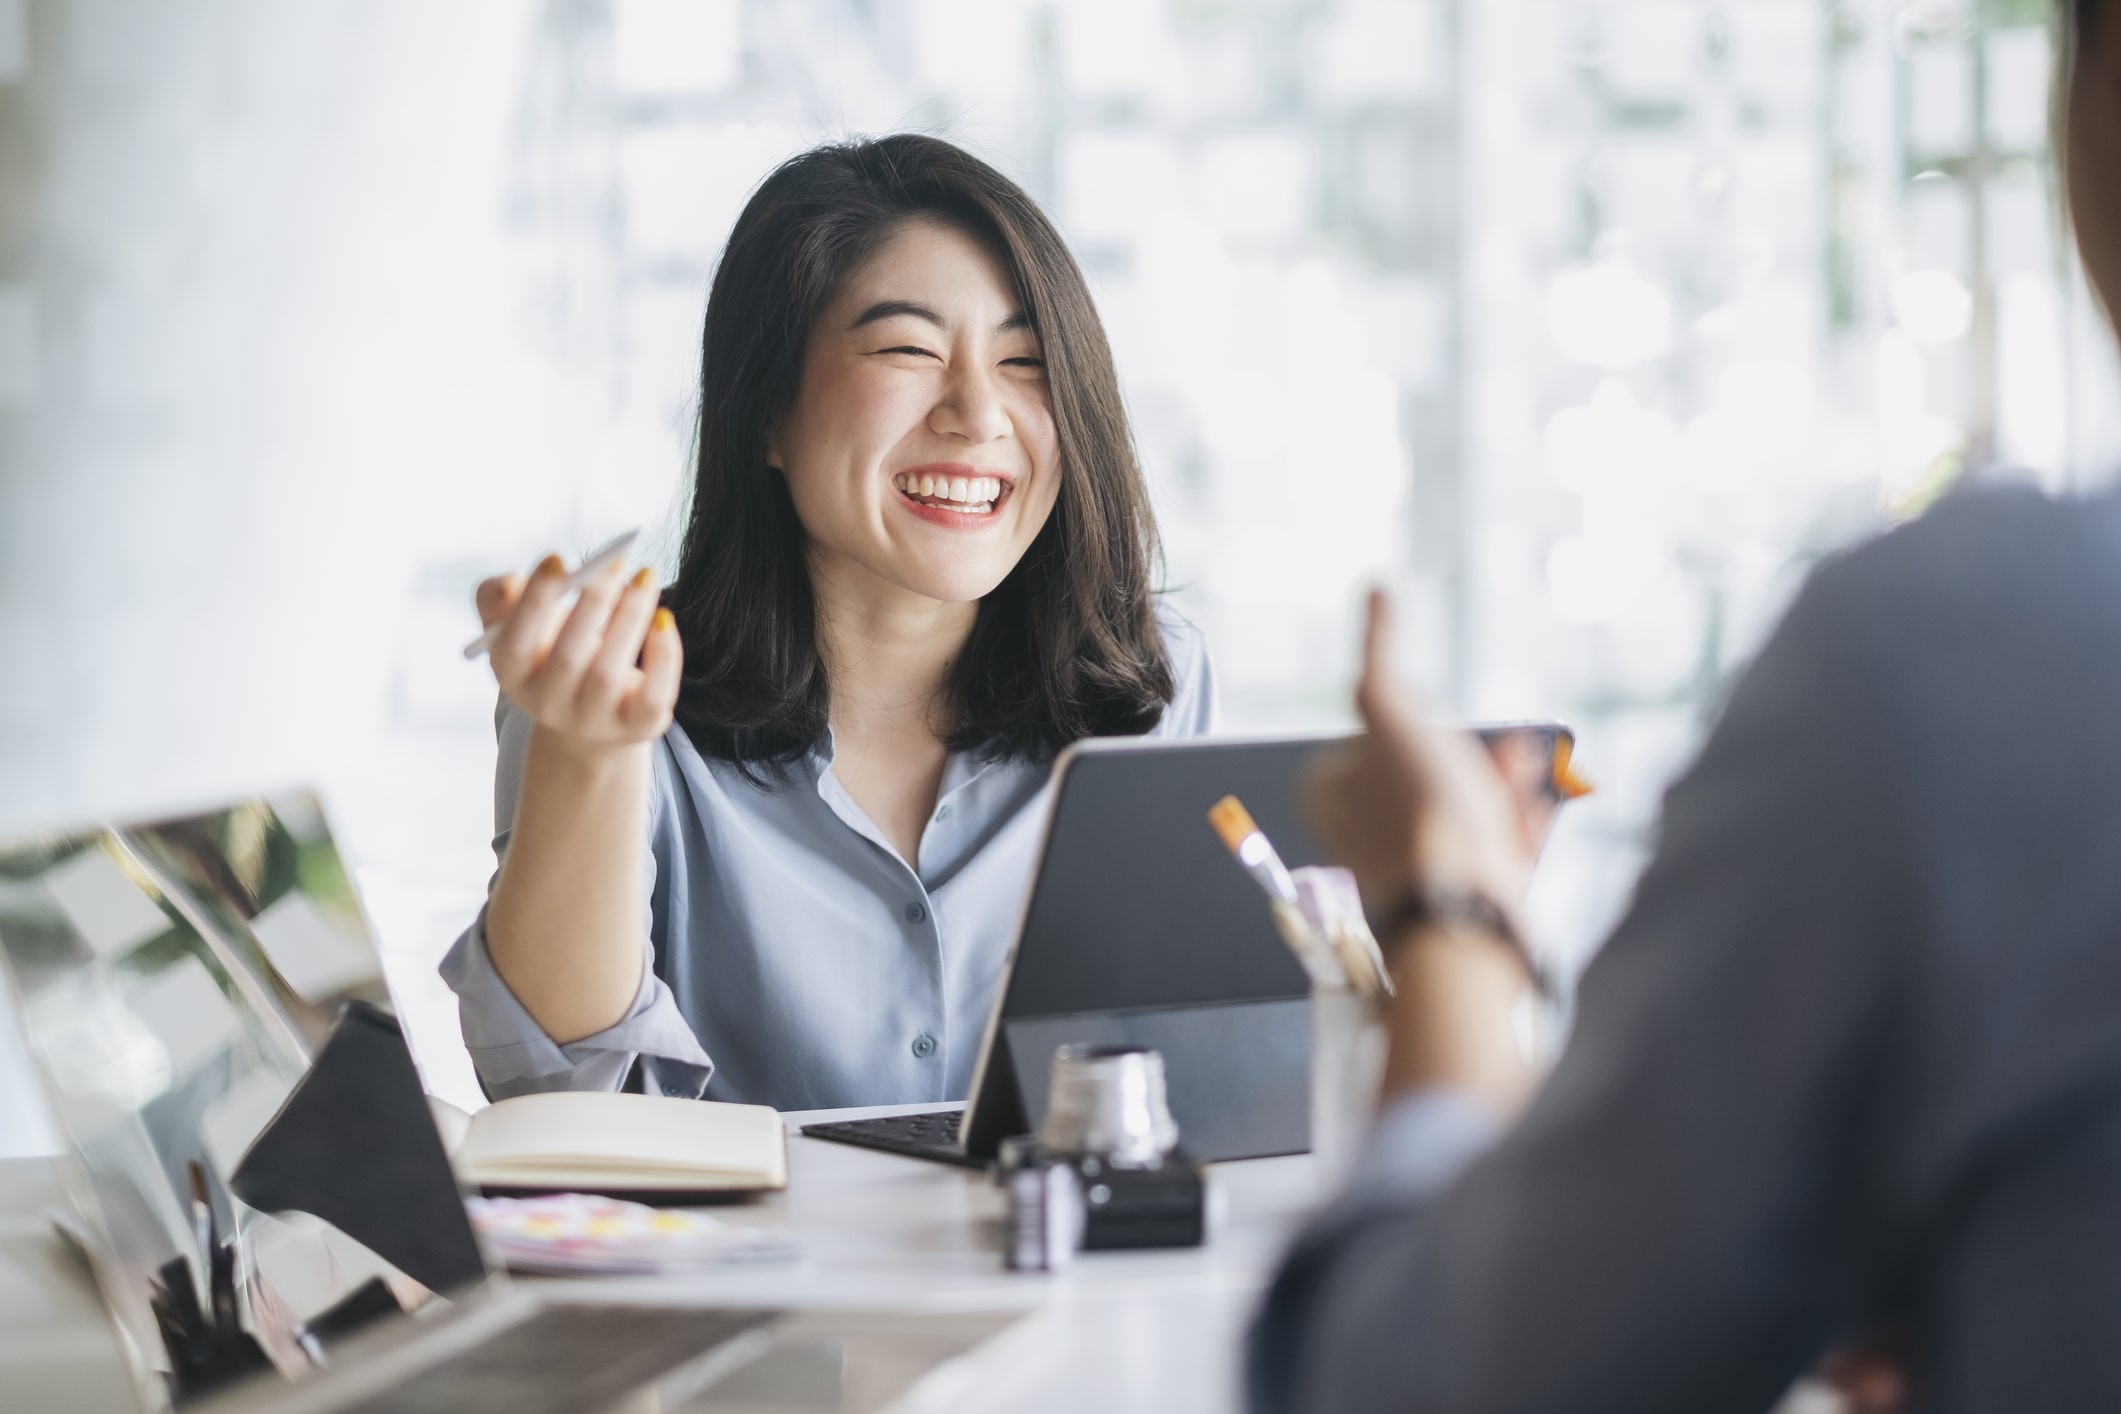 SAP Launches Cloud ERP, GROW with SAP, in Southeast Asia to Help Empower Small and Medium Enterprises for Sustainable Success in Digital Economy